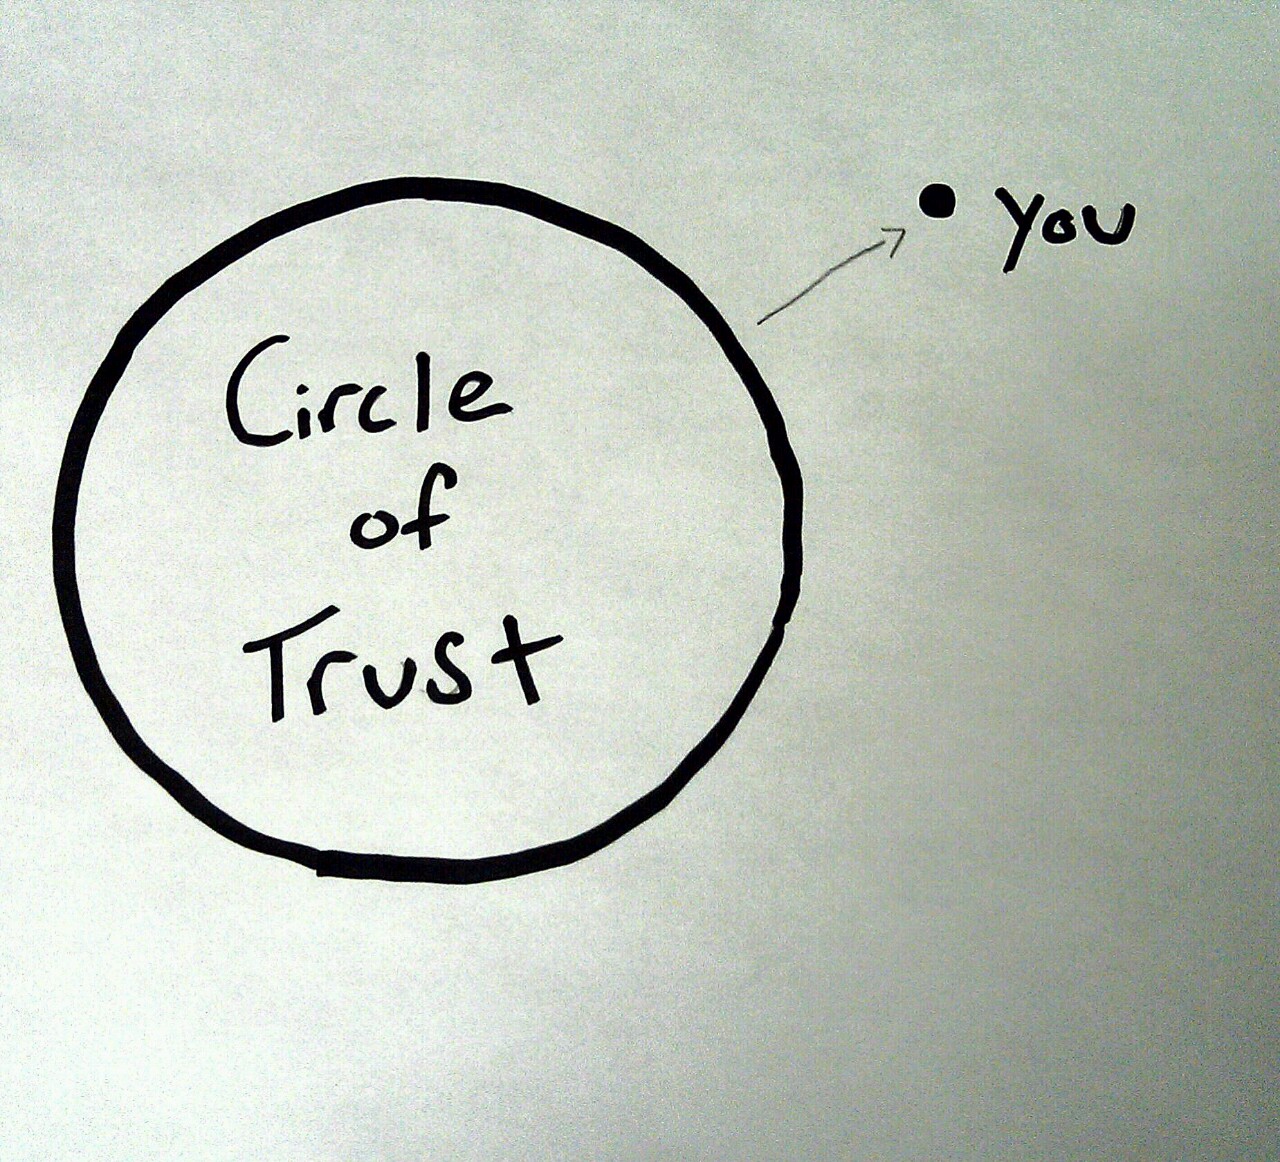 Circle Of Trust Quotes About.